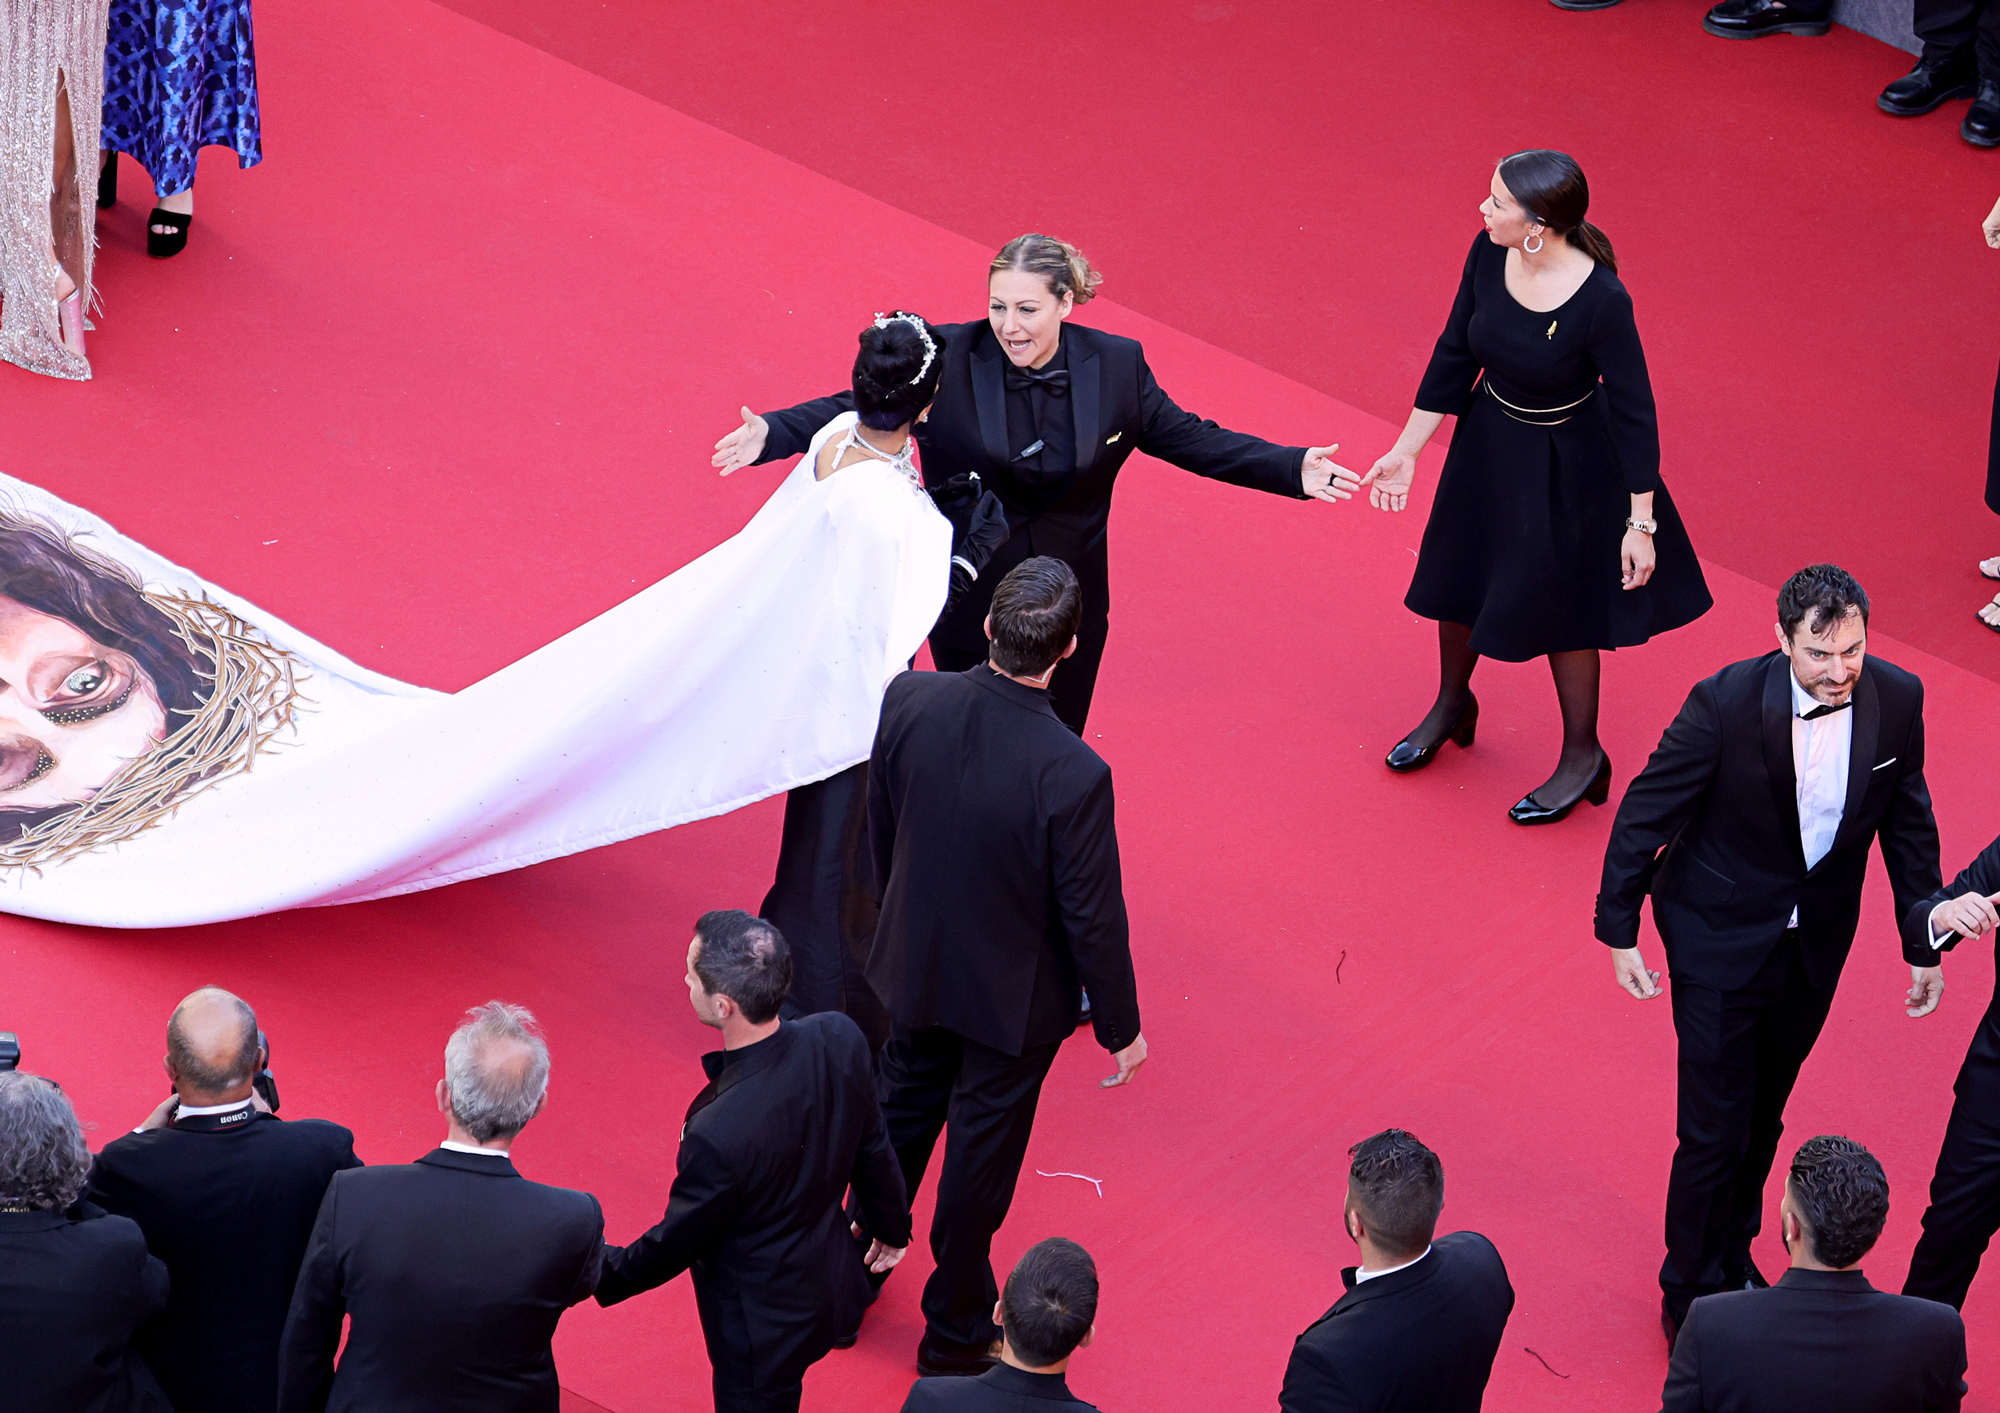 Breaking Down the Security Guard Incidents at Cannes Film Festival